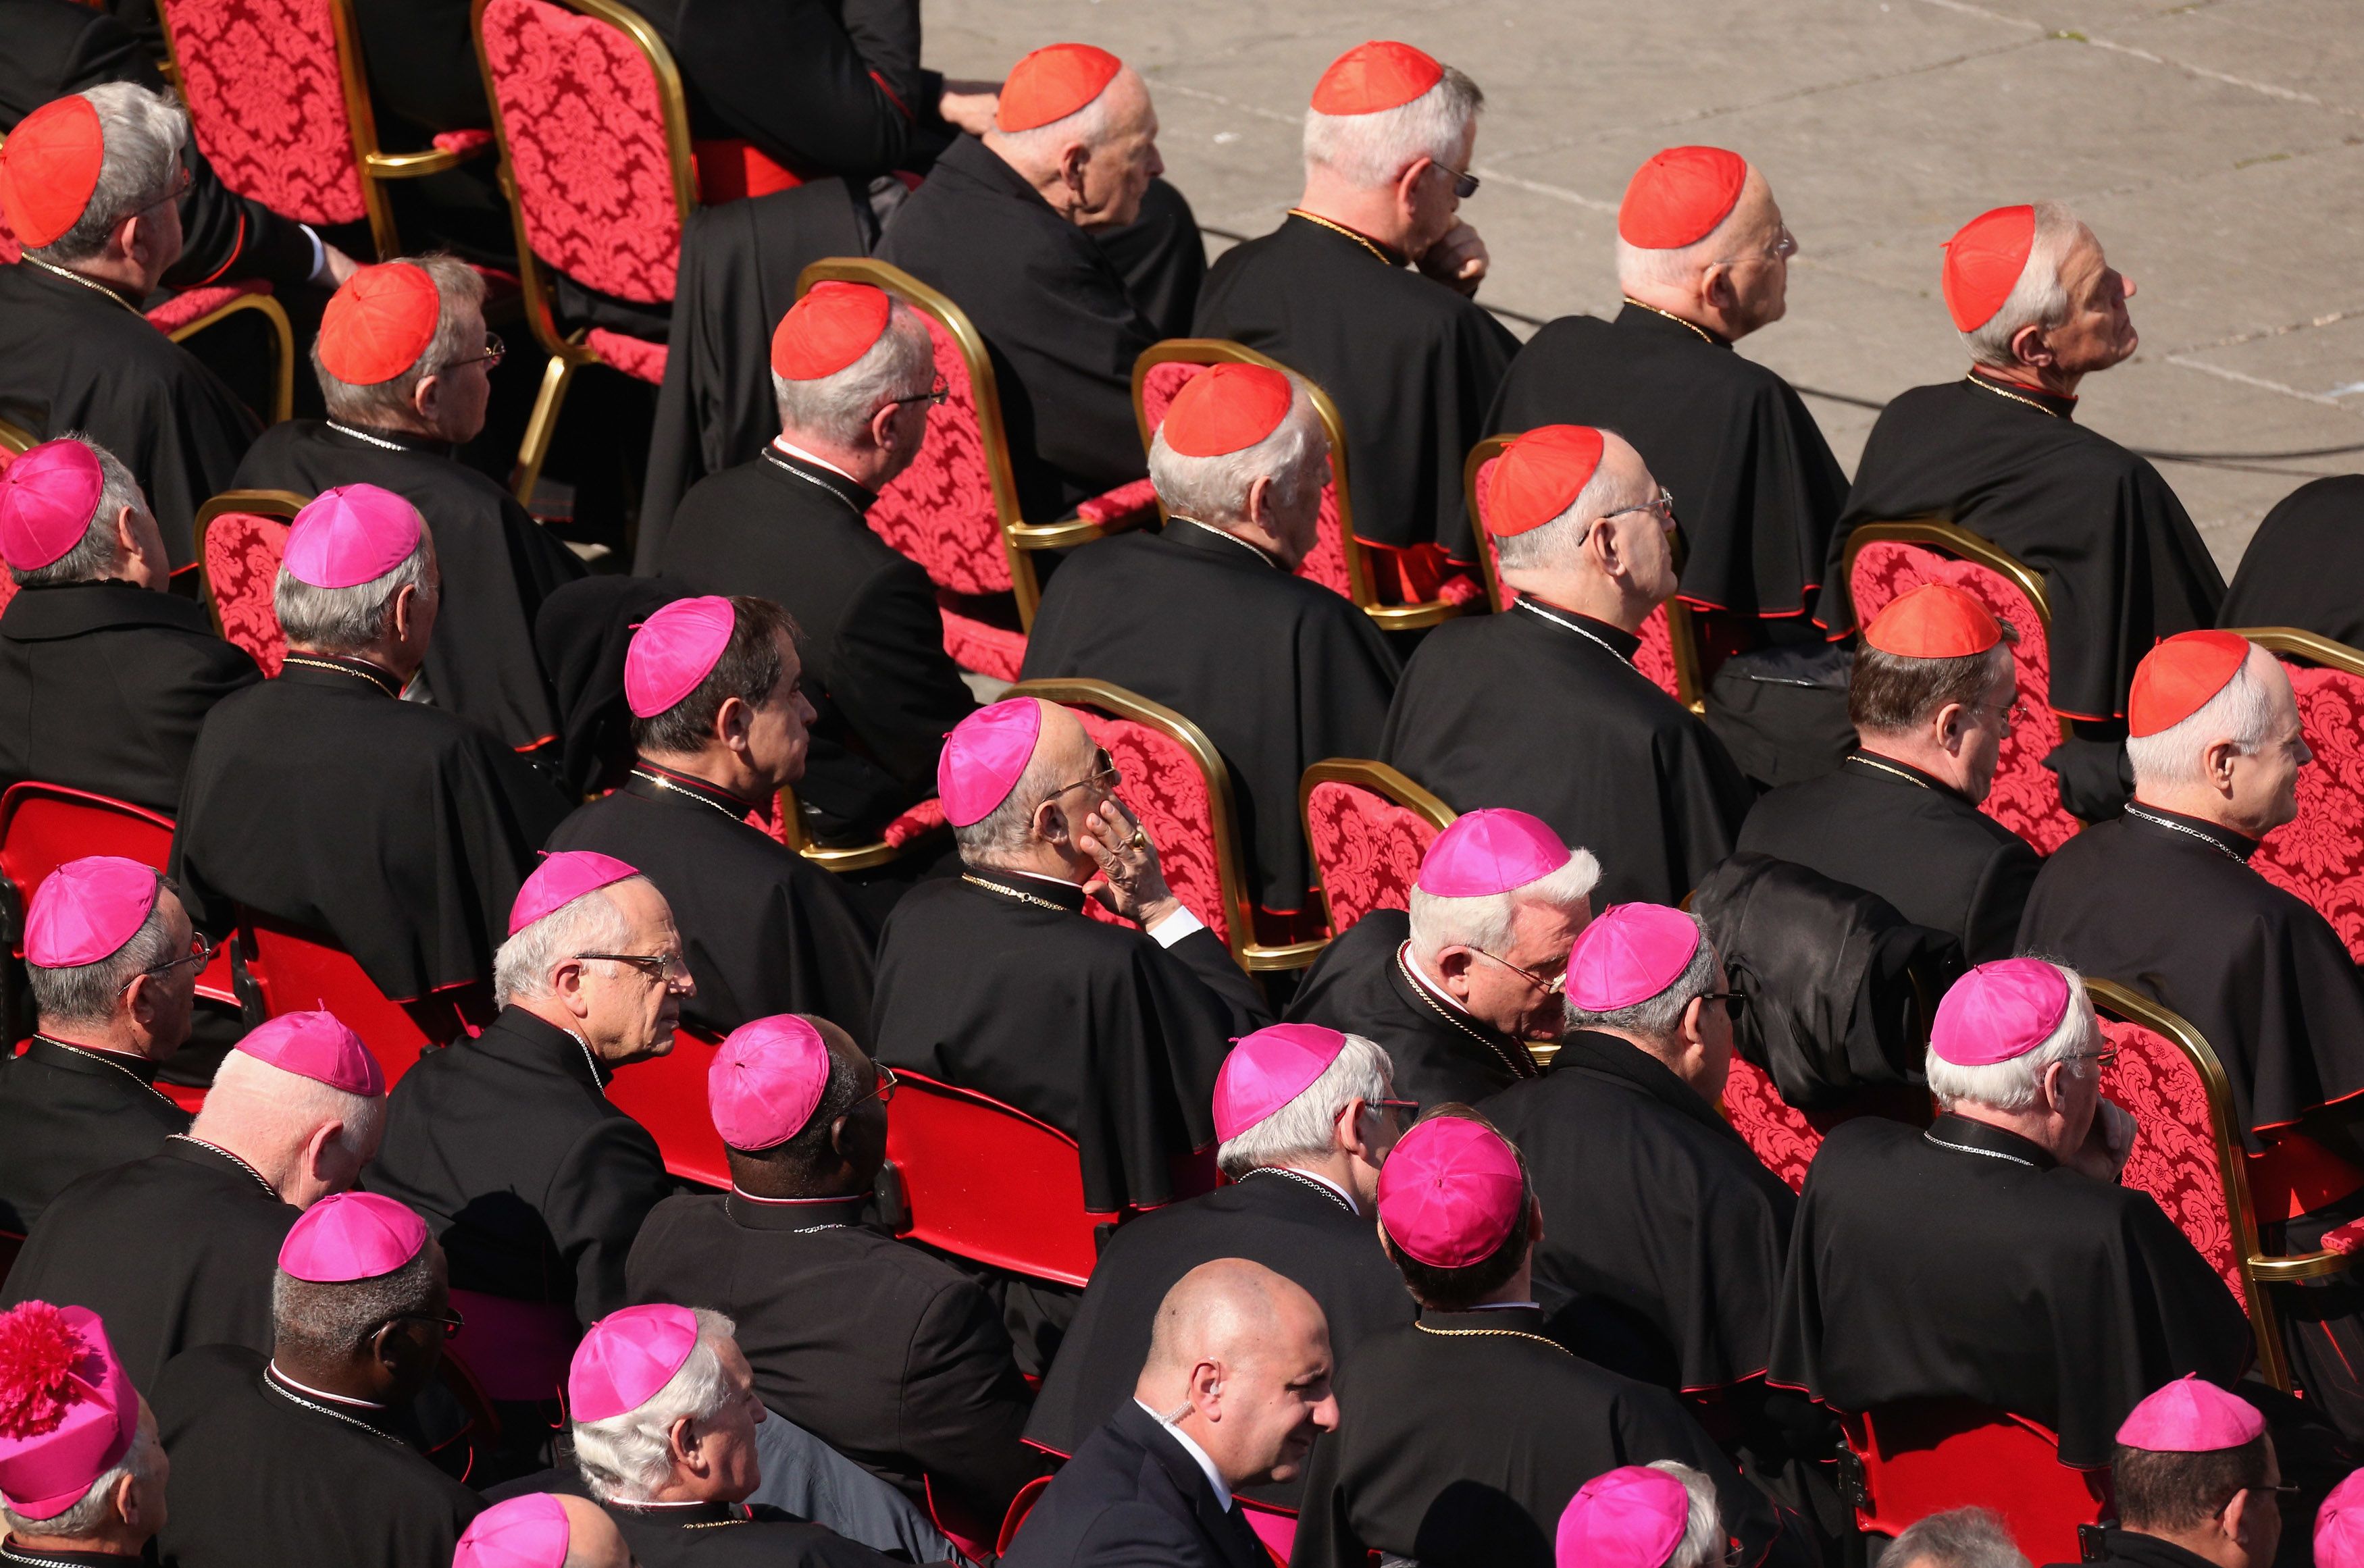 Priest abuse victims' group blacklists 12 cardinals for pope